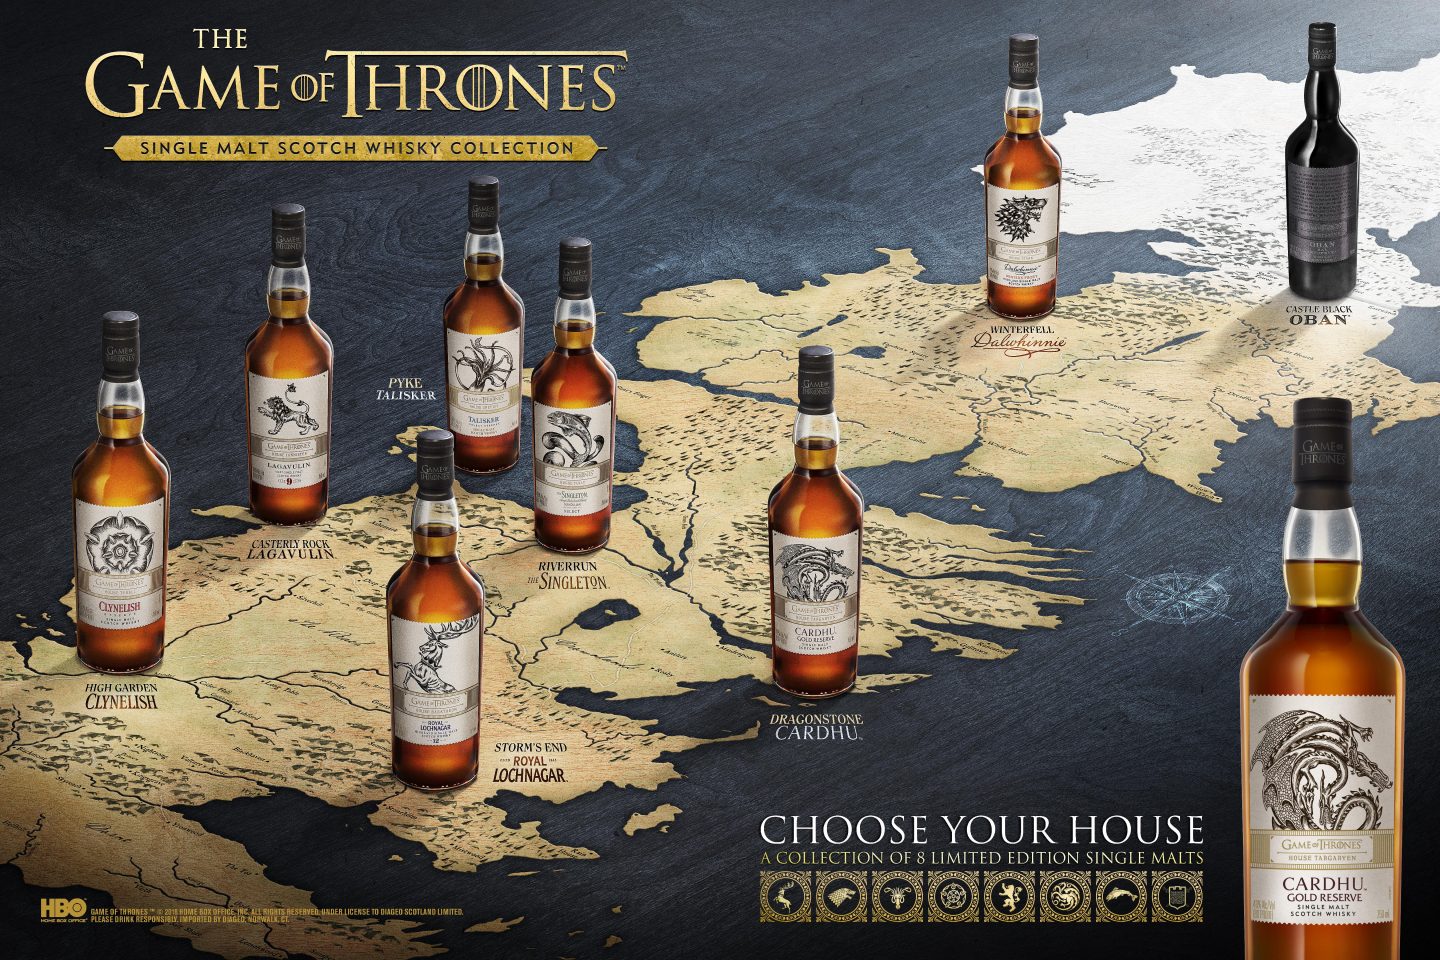 Game of Thrones Single Malt Scotch Whisky Collection (HBO/DIAGEO)